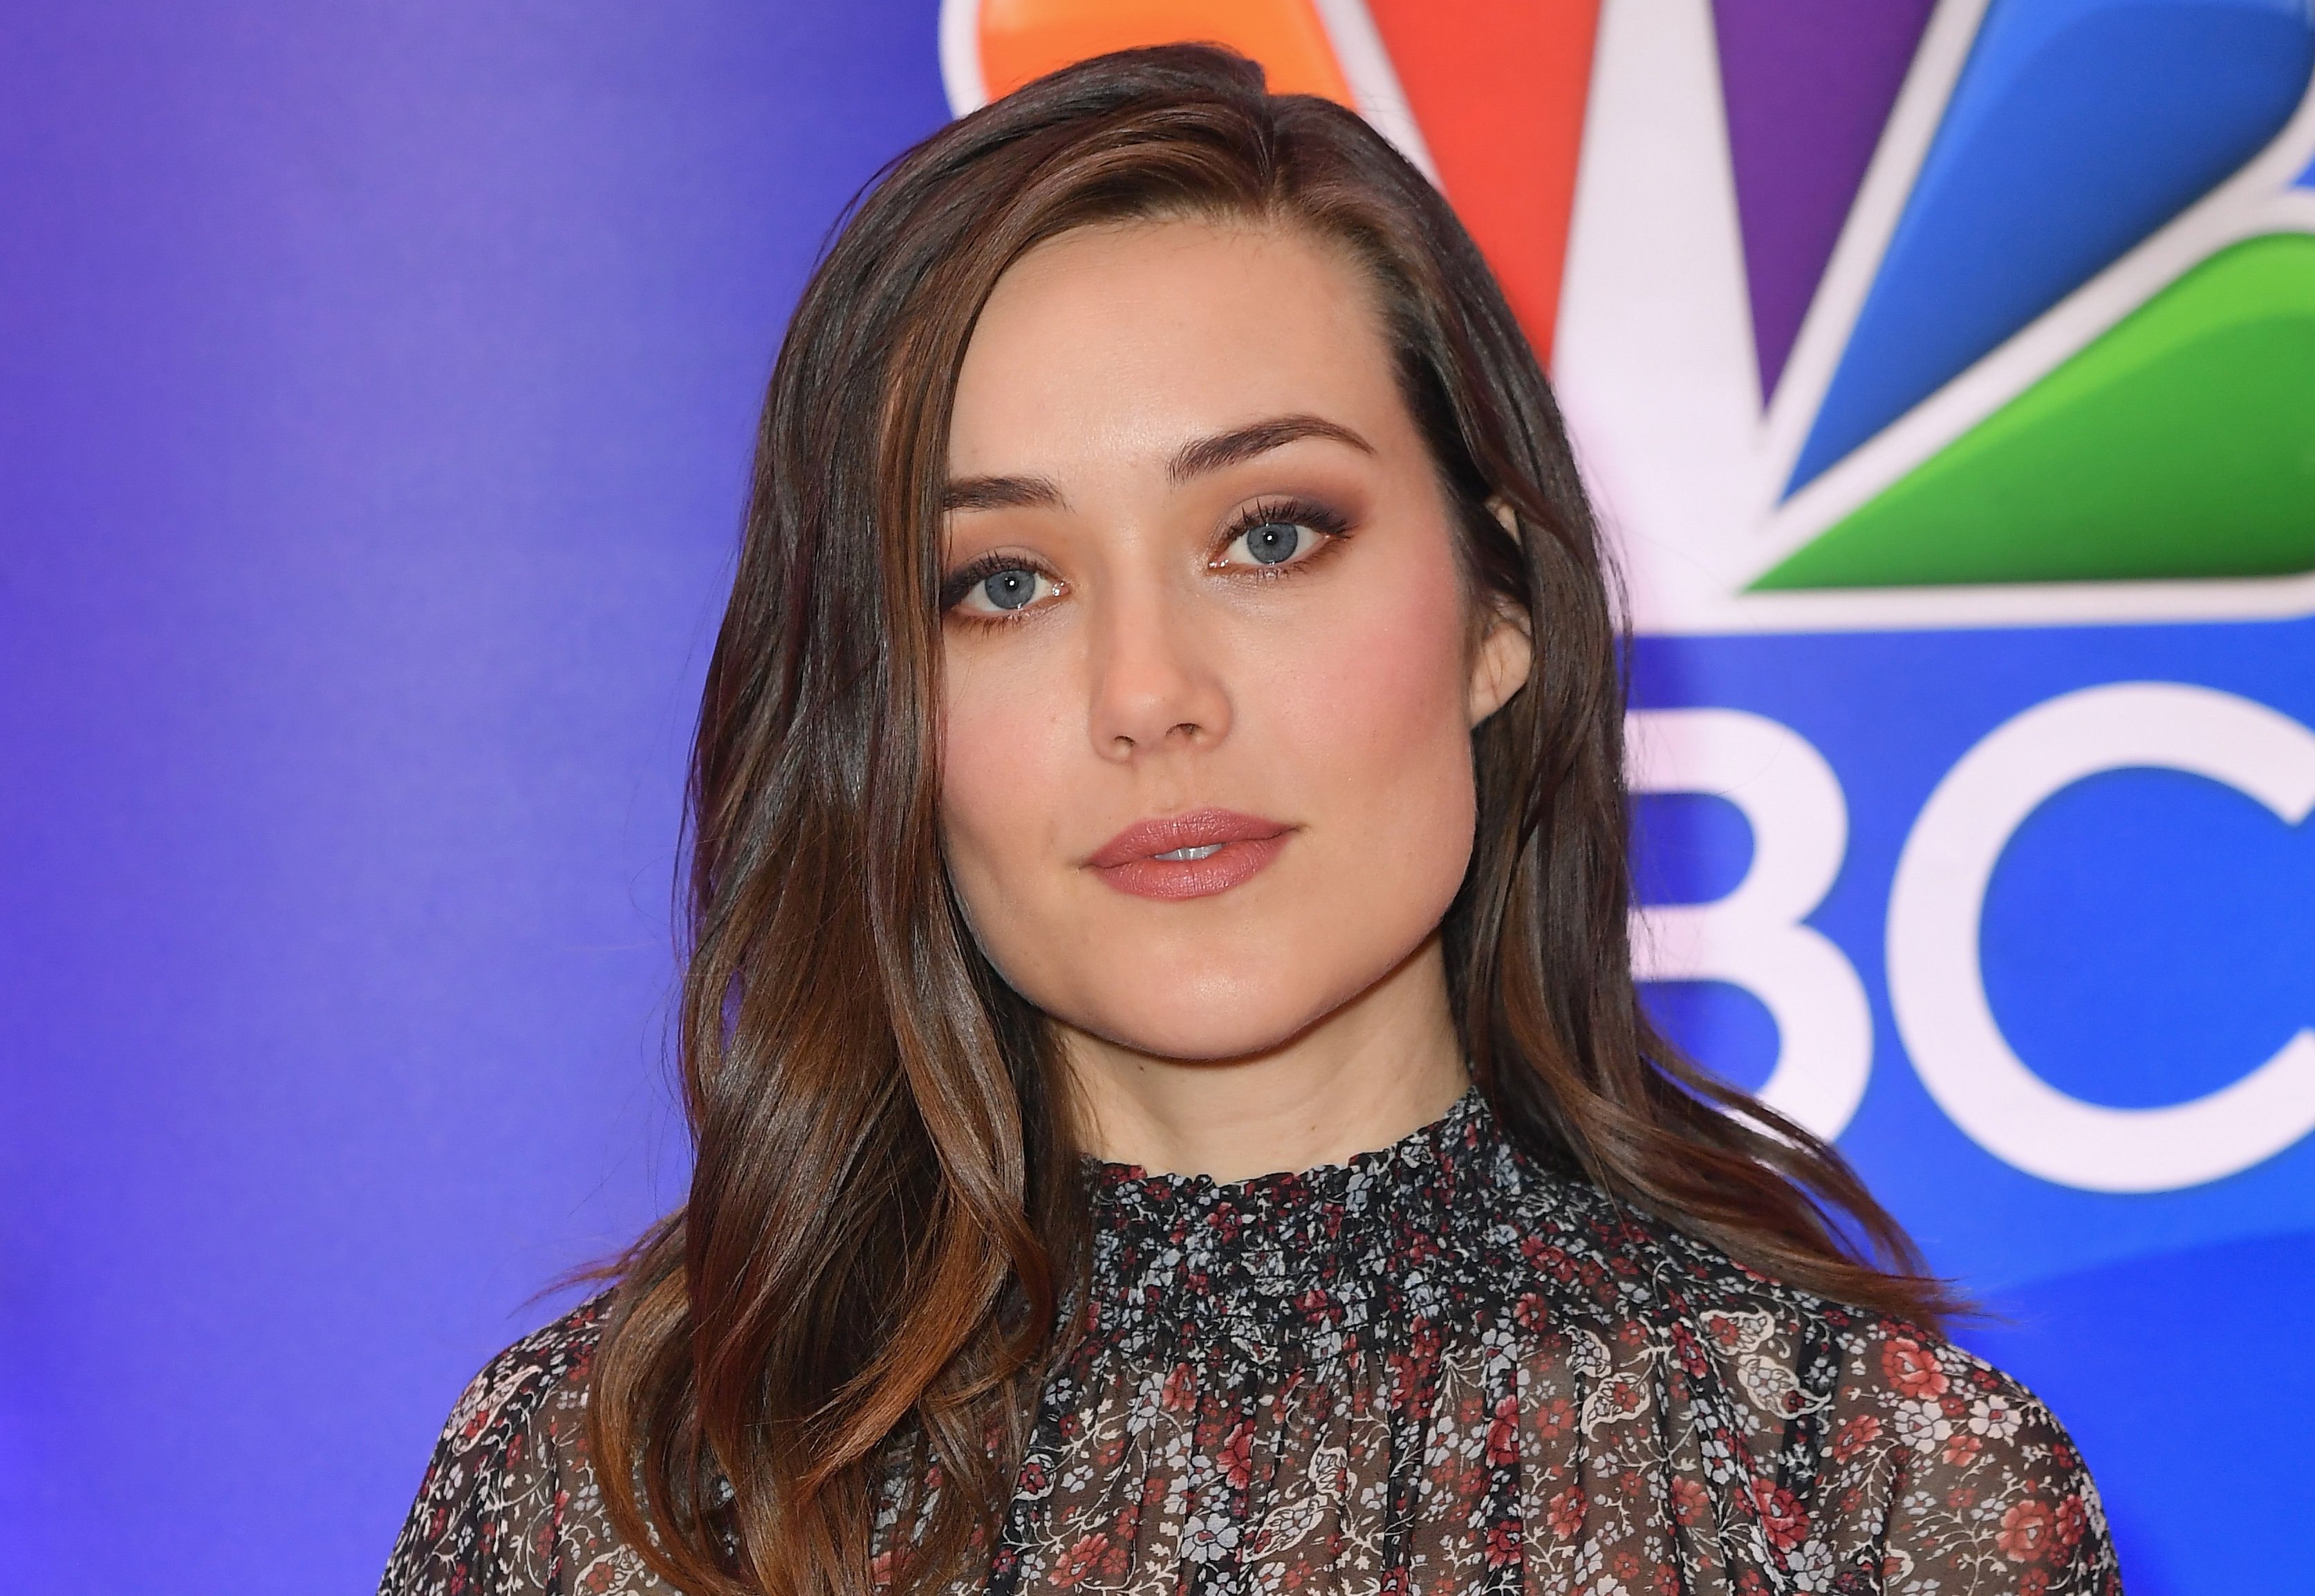 Megan Boone attends the NBC mid-season press junket at The Four Seasons in New York on January 24, 2019. | Source: Getty Images